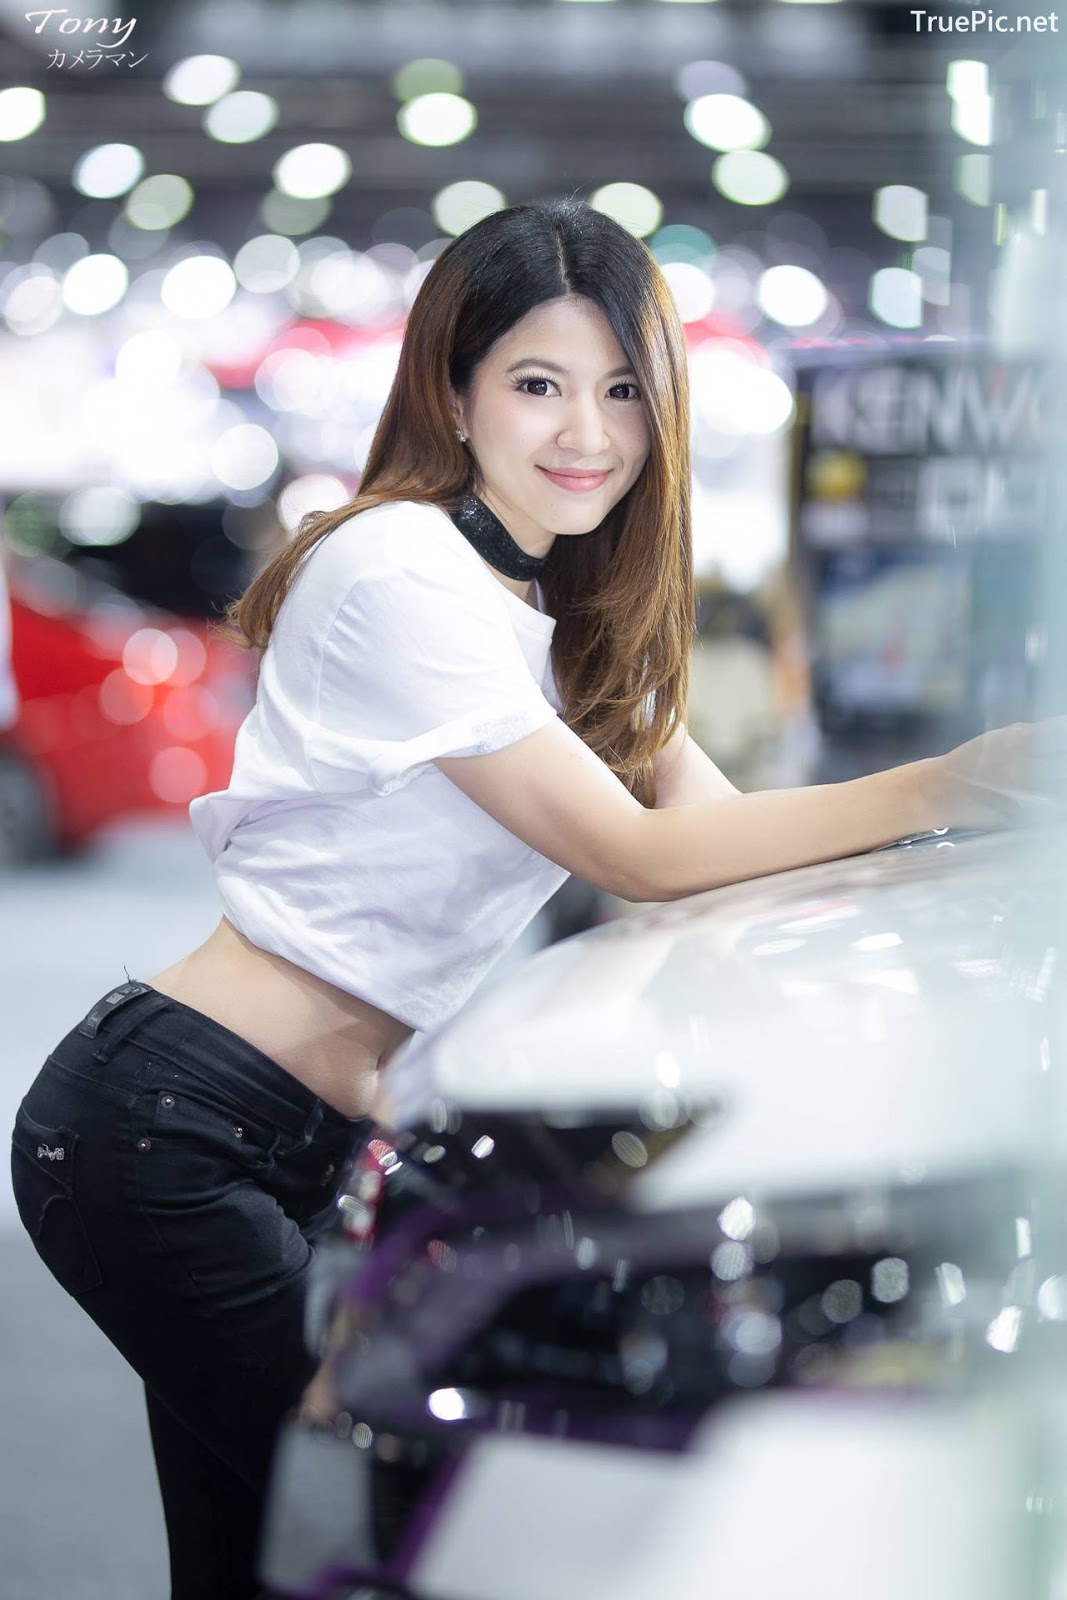 Image-Thailand-Hot-Model-Thai-Racing-Girl-At-Motor-Expo-2018-TruePic.net- Picture-105